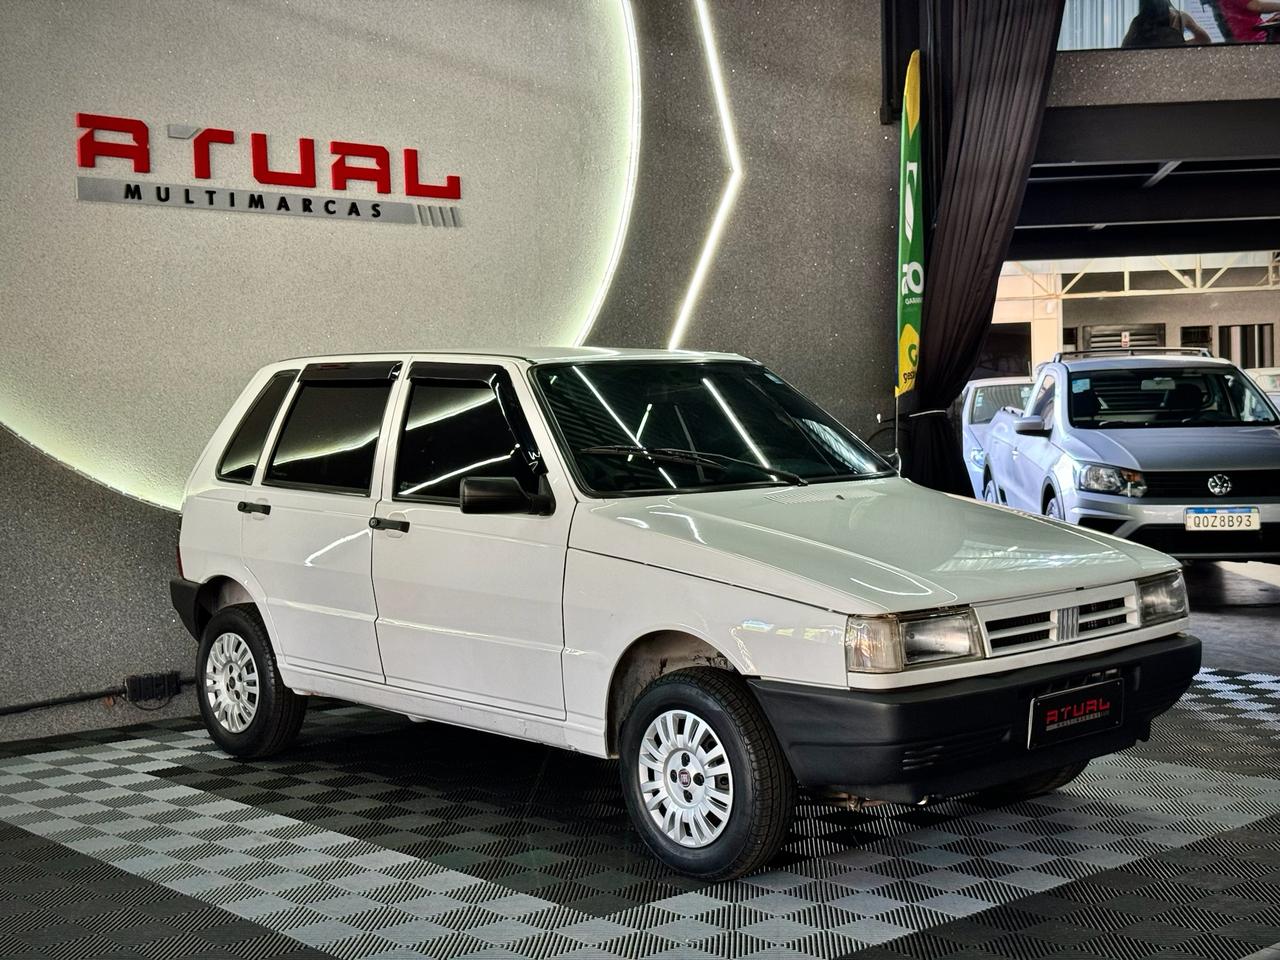 Fiat Uno Mille EP 1.0 IE 4p